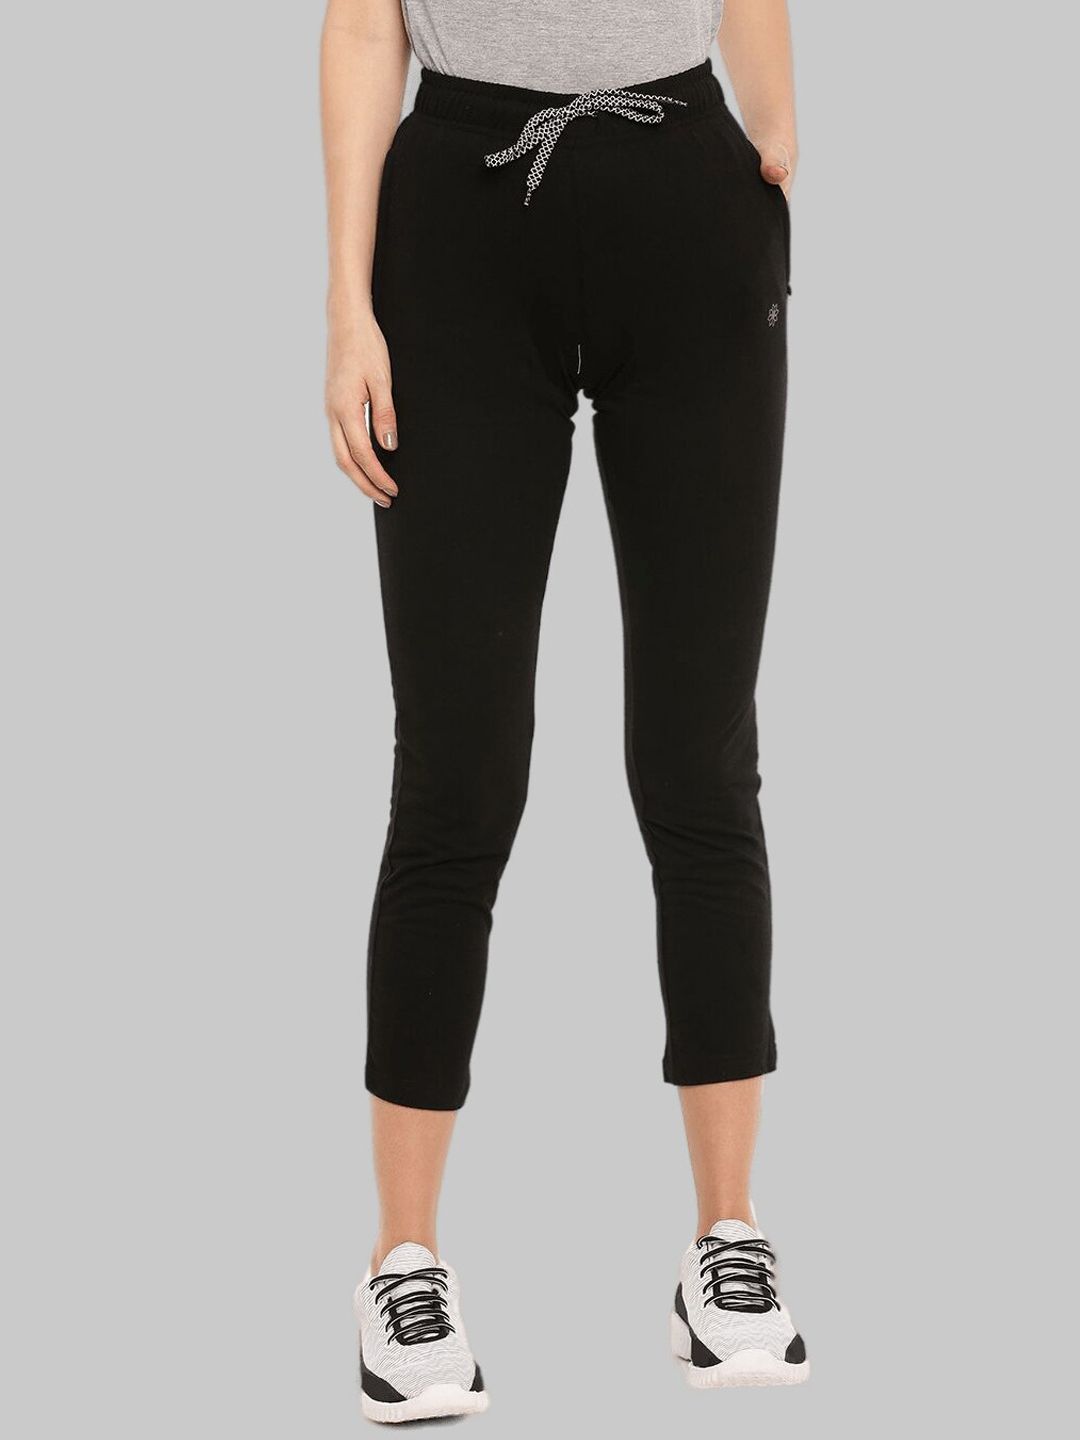 Dollar Missy Women Black Solid Cotton Three-Fourth Length Track Pants Price in India